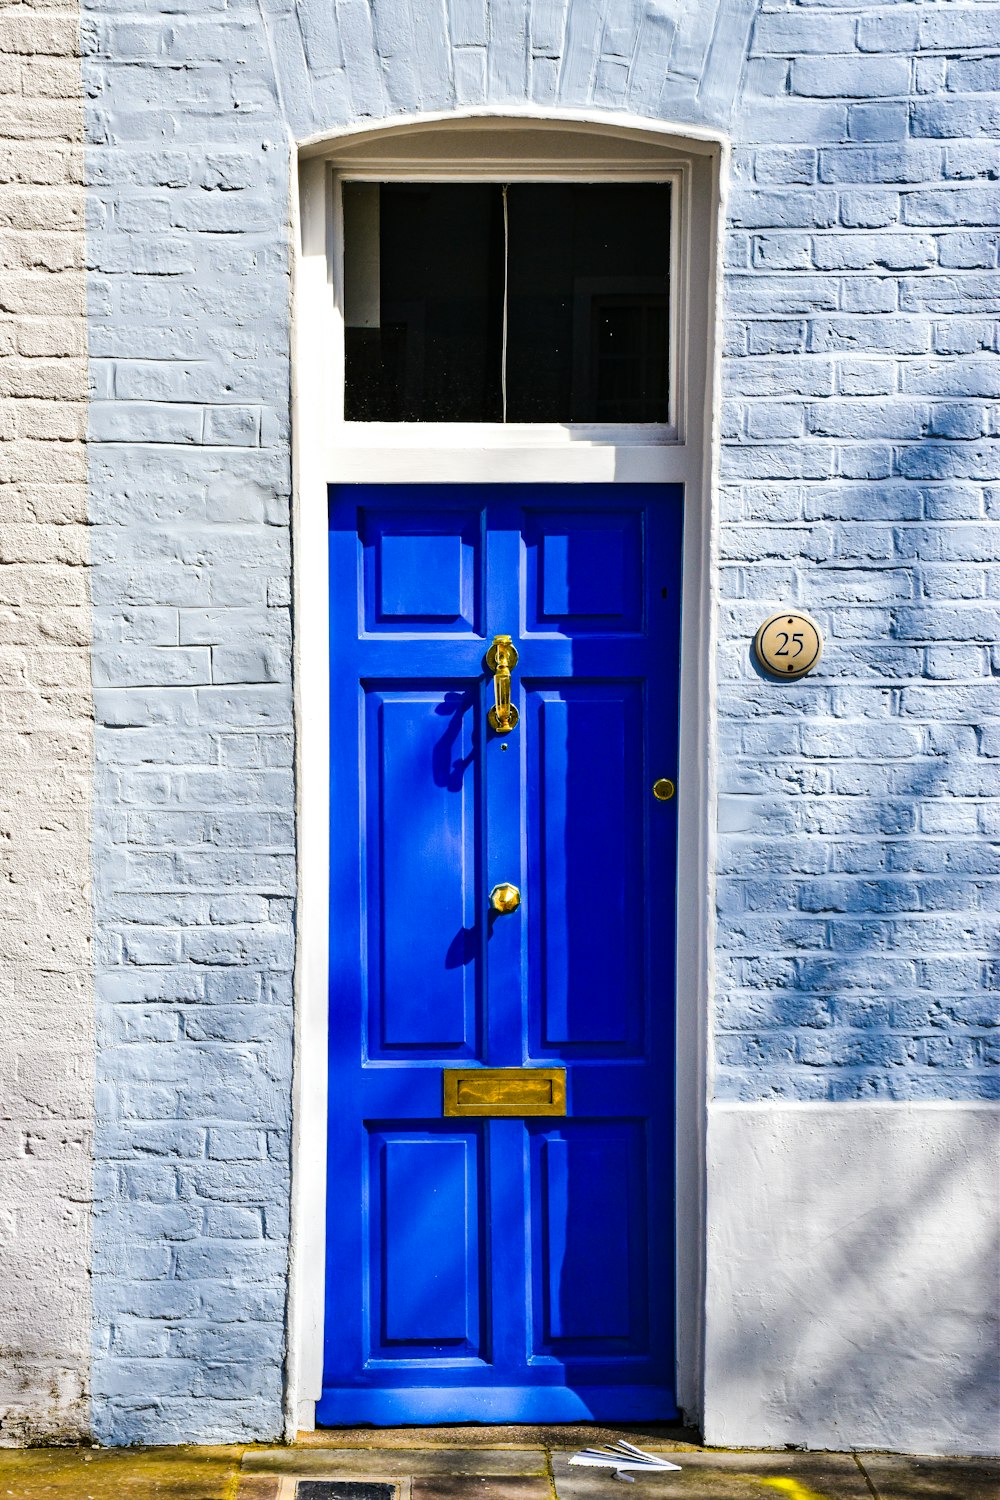 a blue door with a yellow handle on a brick building